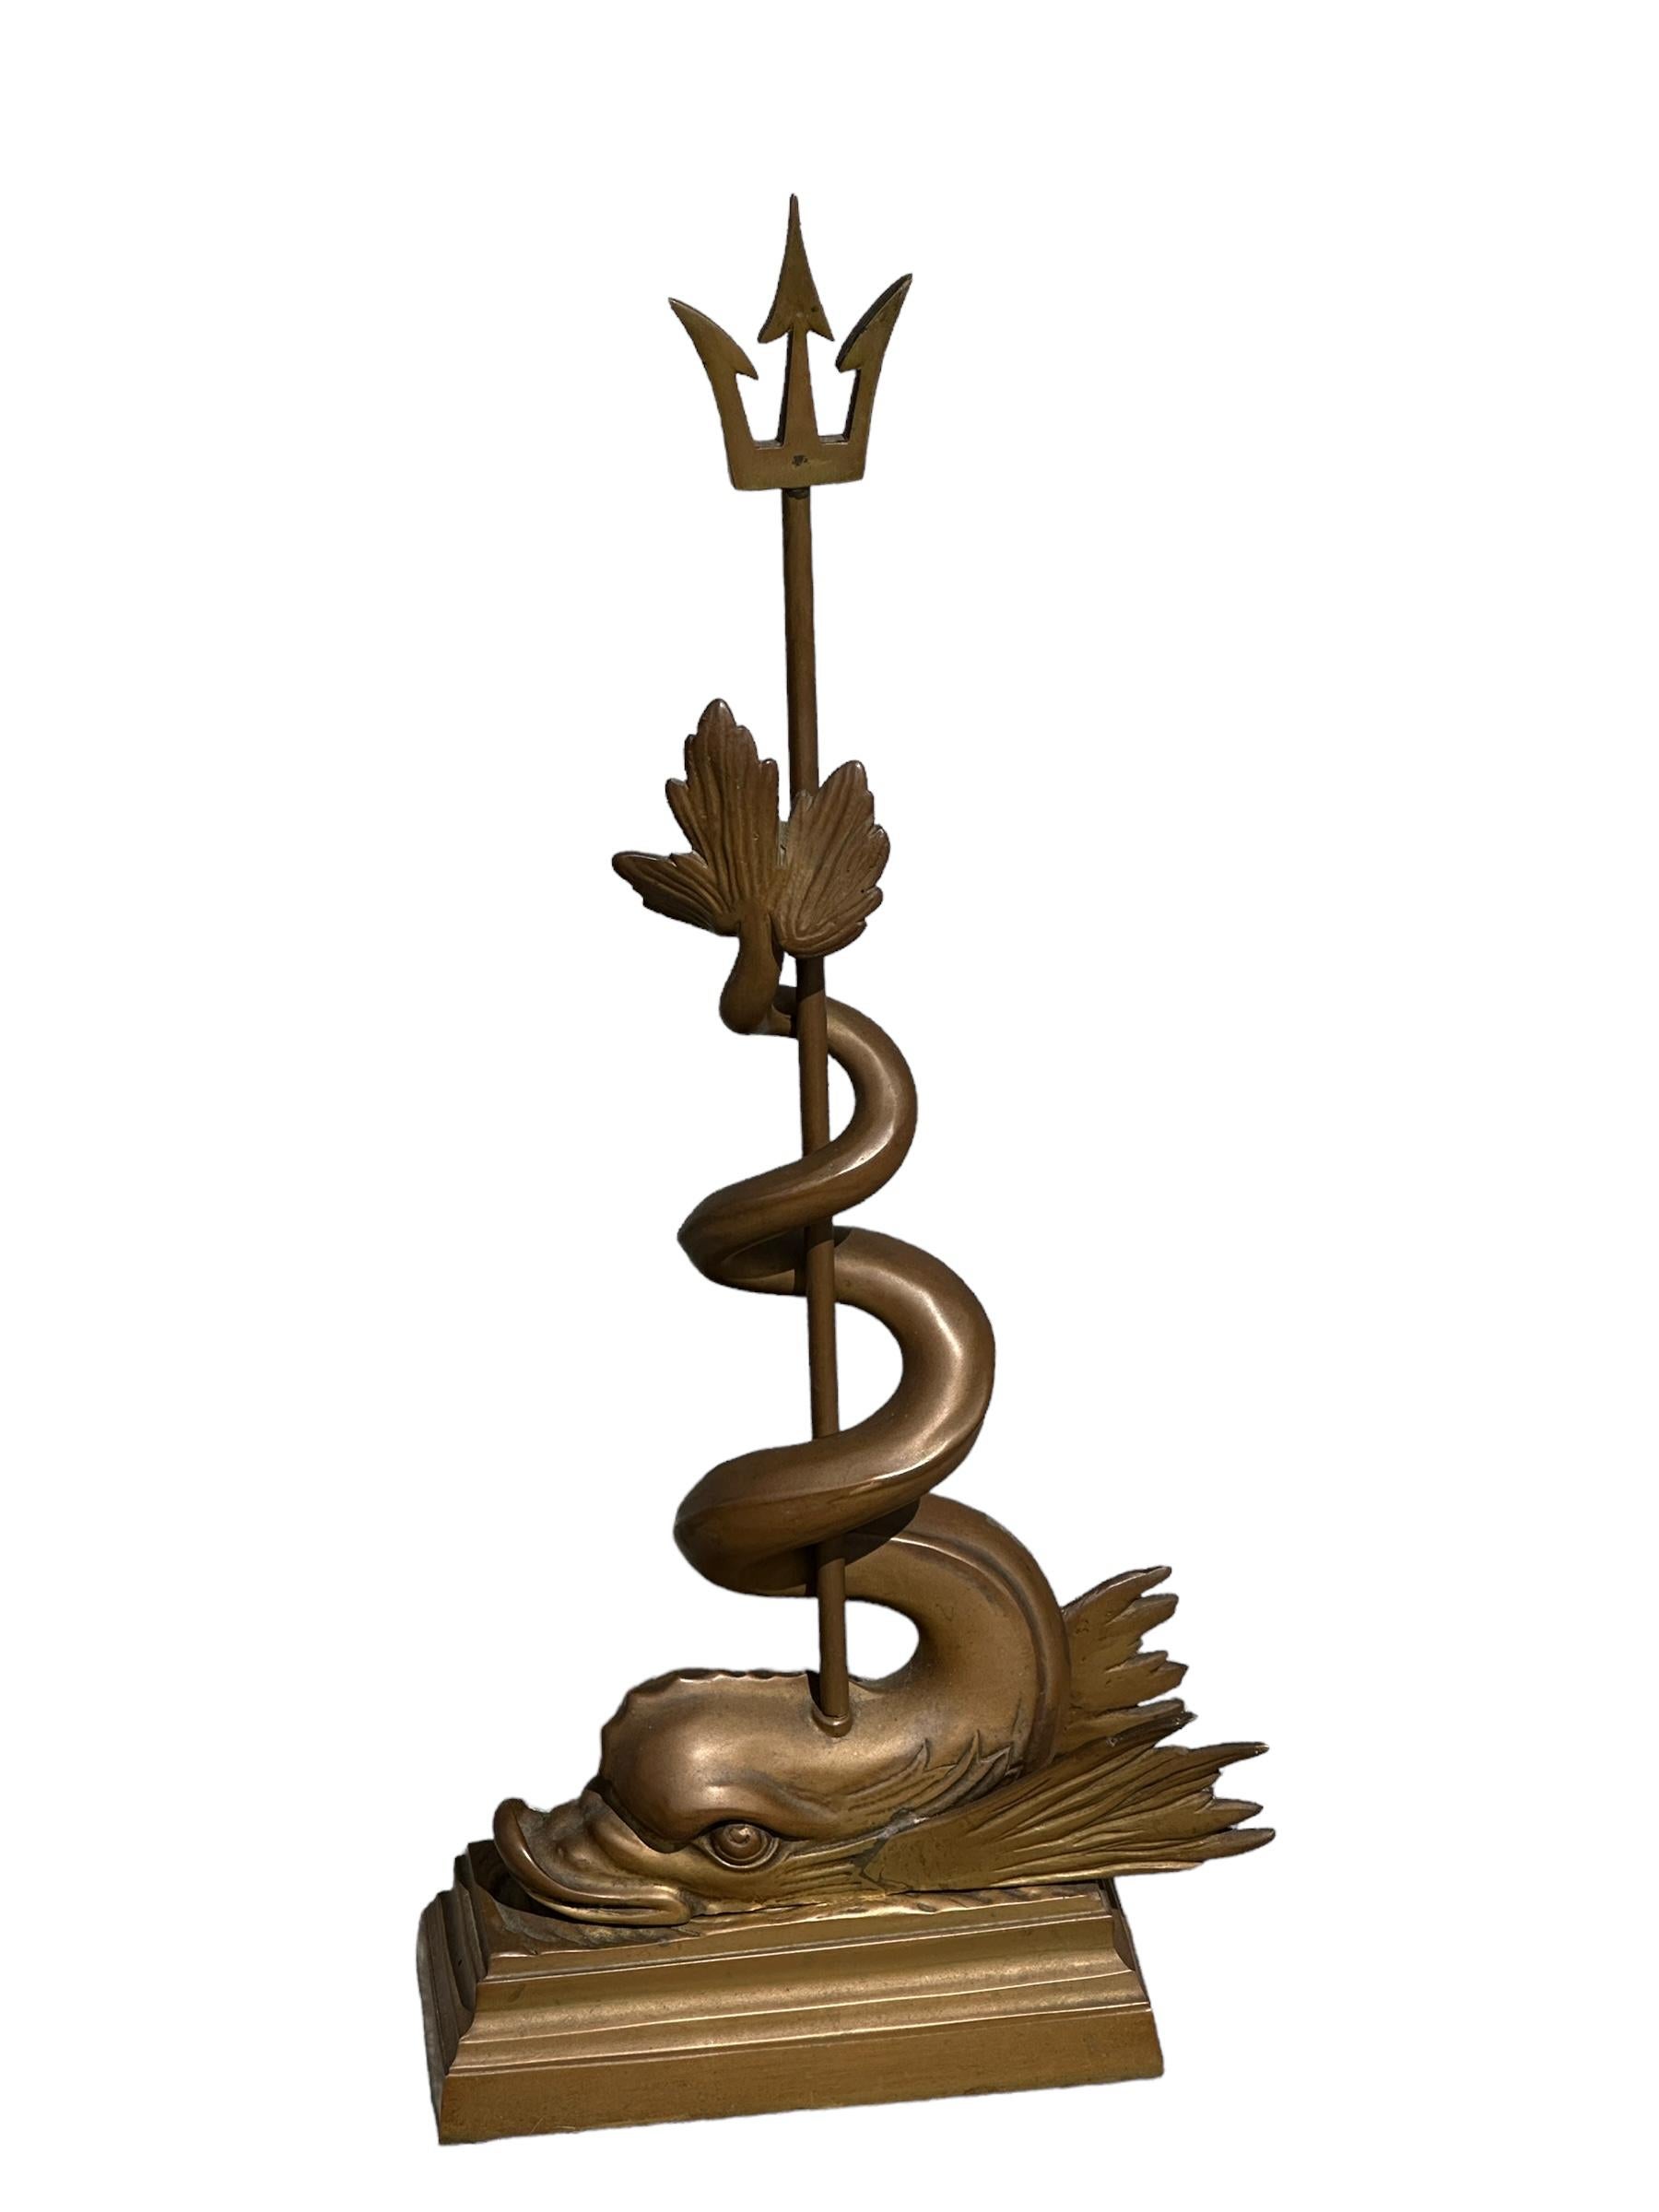 A beautiful and substantial Nautical, cast metal, antique doorstop with original patina finish. Depicting a mythological grotto dolphin style sea serpent coiled around Poseidon's trident which is then mounted on a multi tiered classical plinth. This